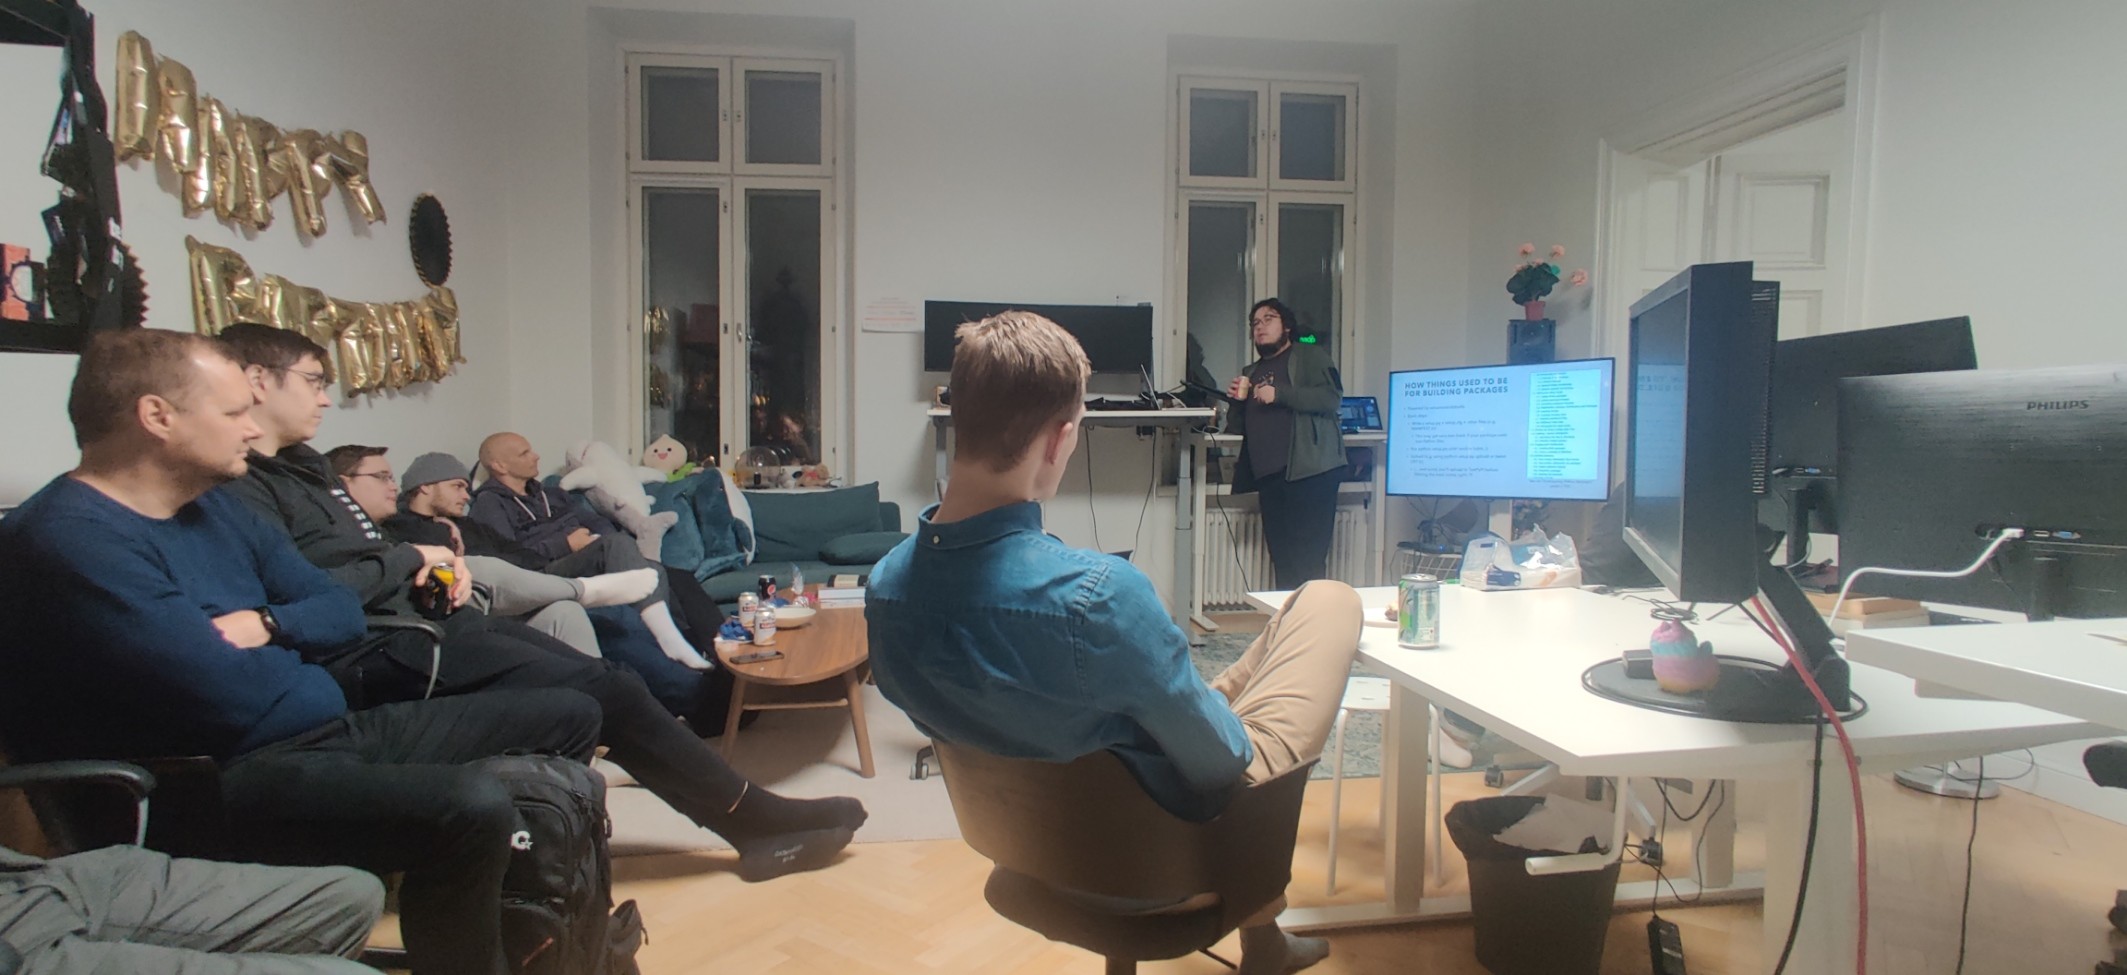 A group of developers sitting on a sofa and chairs in an office room with Aarni standing next to a screen, speaking to the audience.